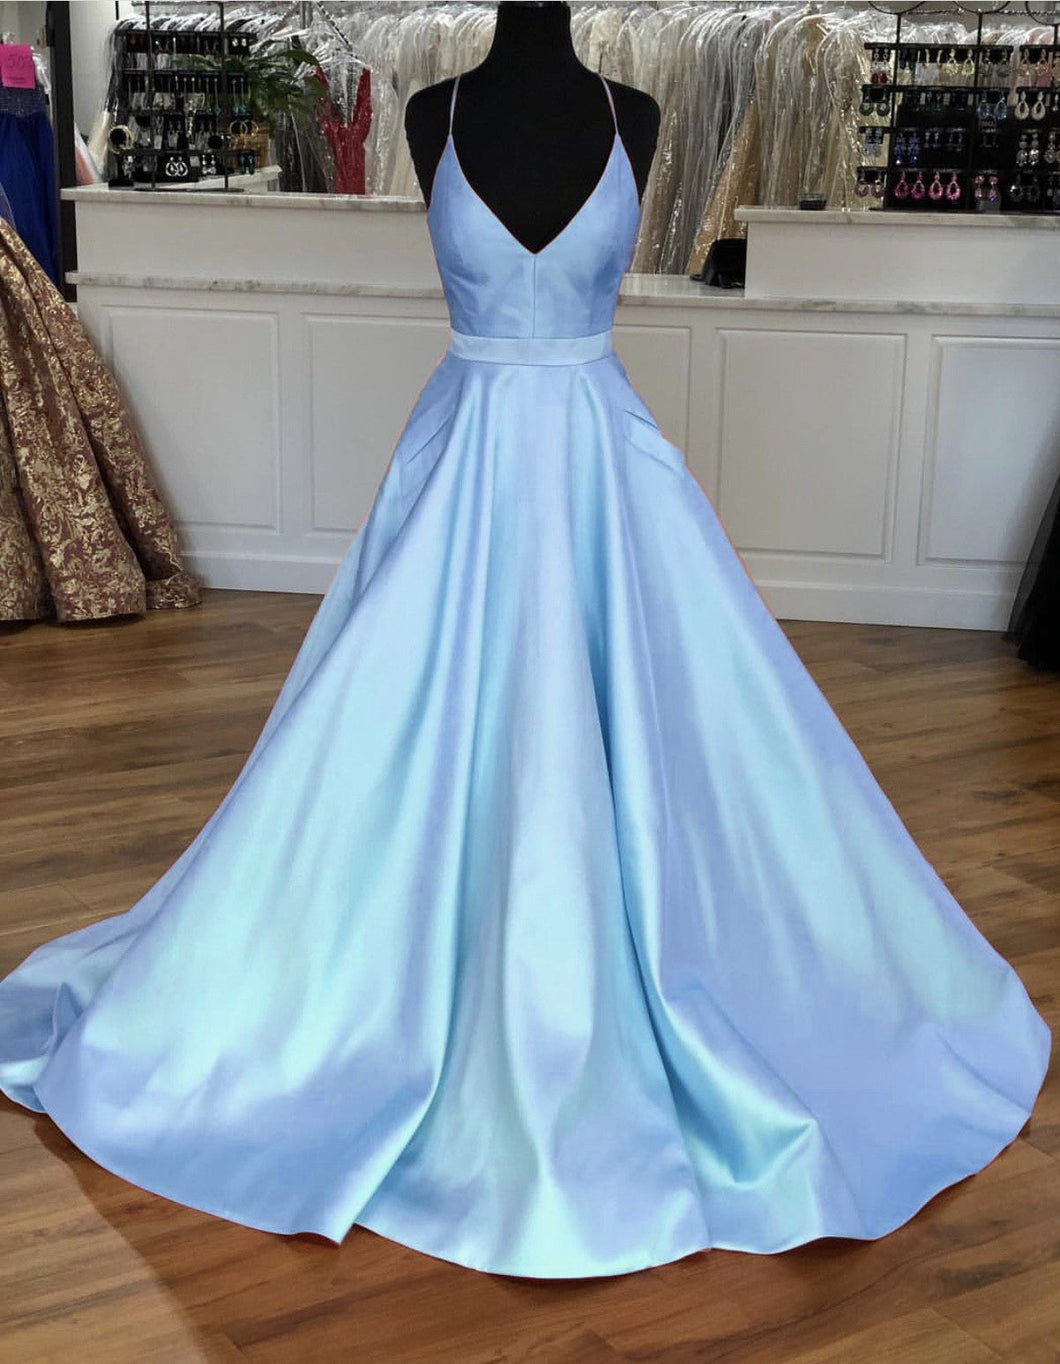 Hand Crafted Couture Cinderella Light Blue Satin Ball Gown Dress Masquerade  Sweet 16 Adult Anastasia by Bbeauty Designs | CustomMade.com